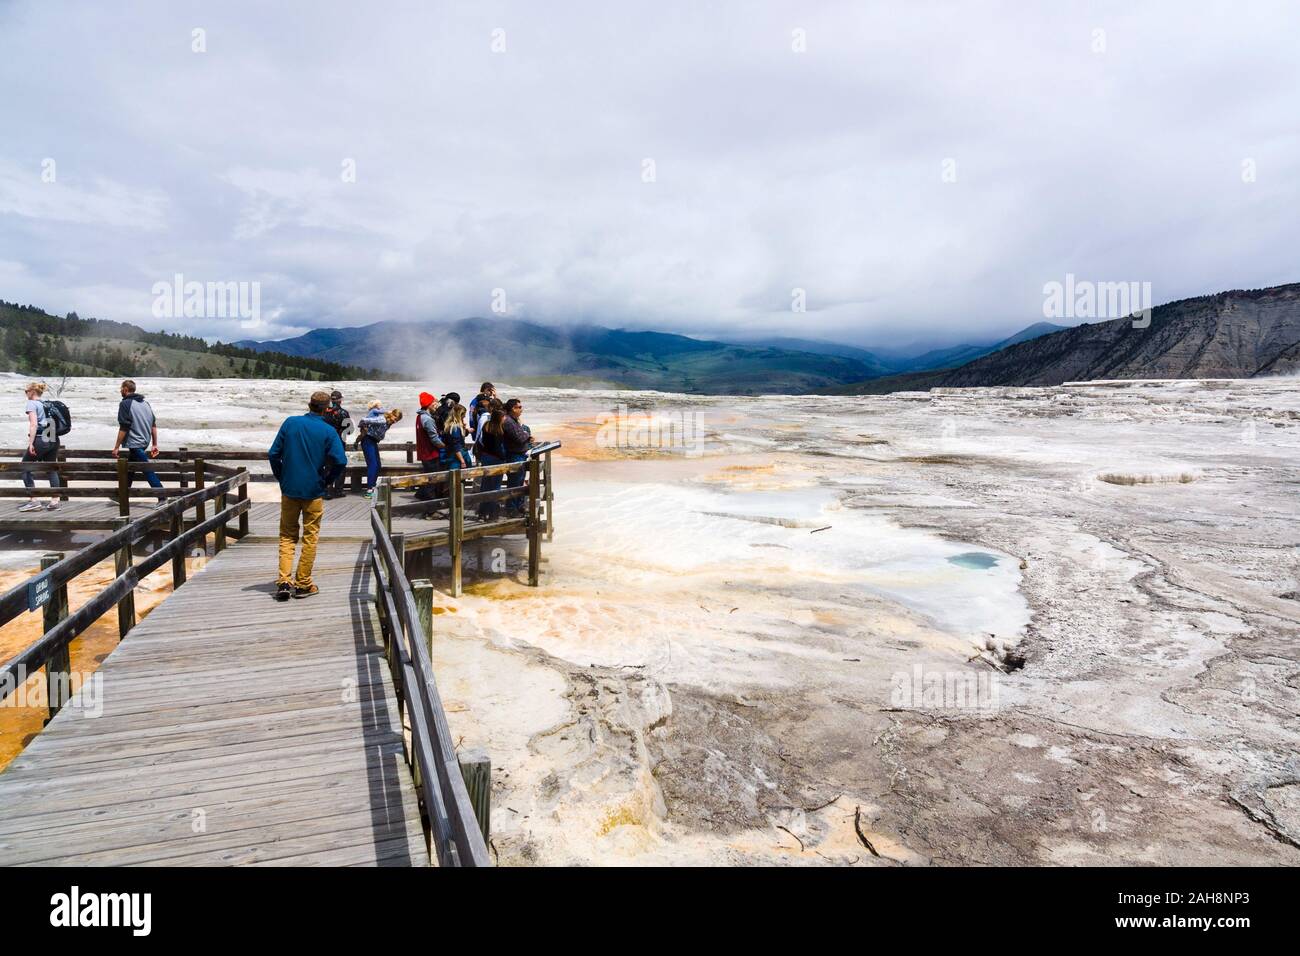 Mammoth Upper Terraces, Yellowstone National Park, Wyoming, United States Stock Photo